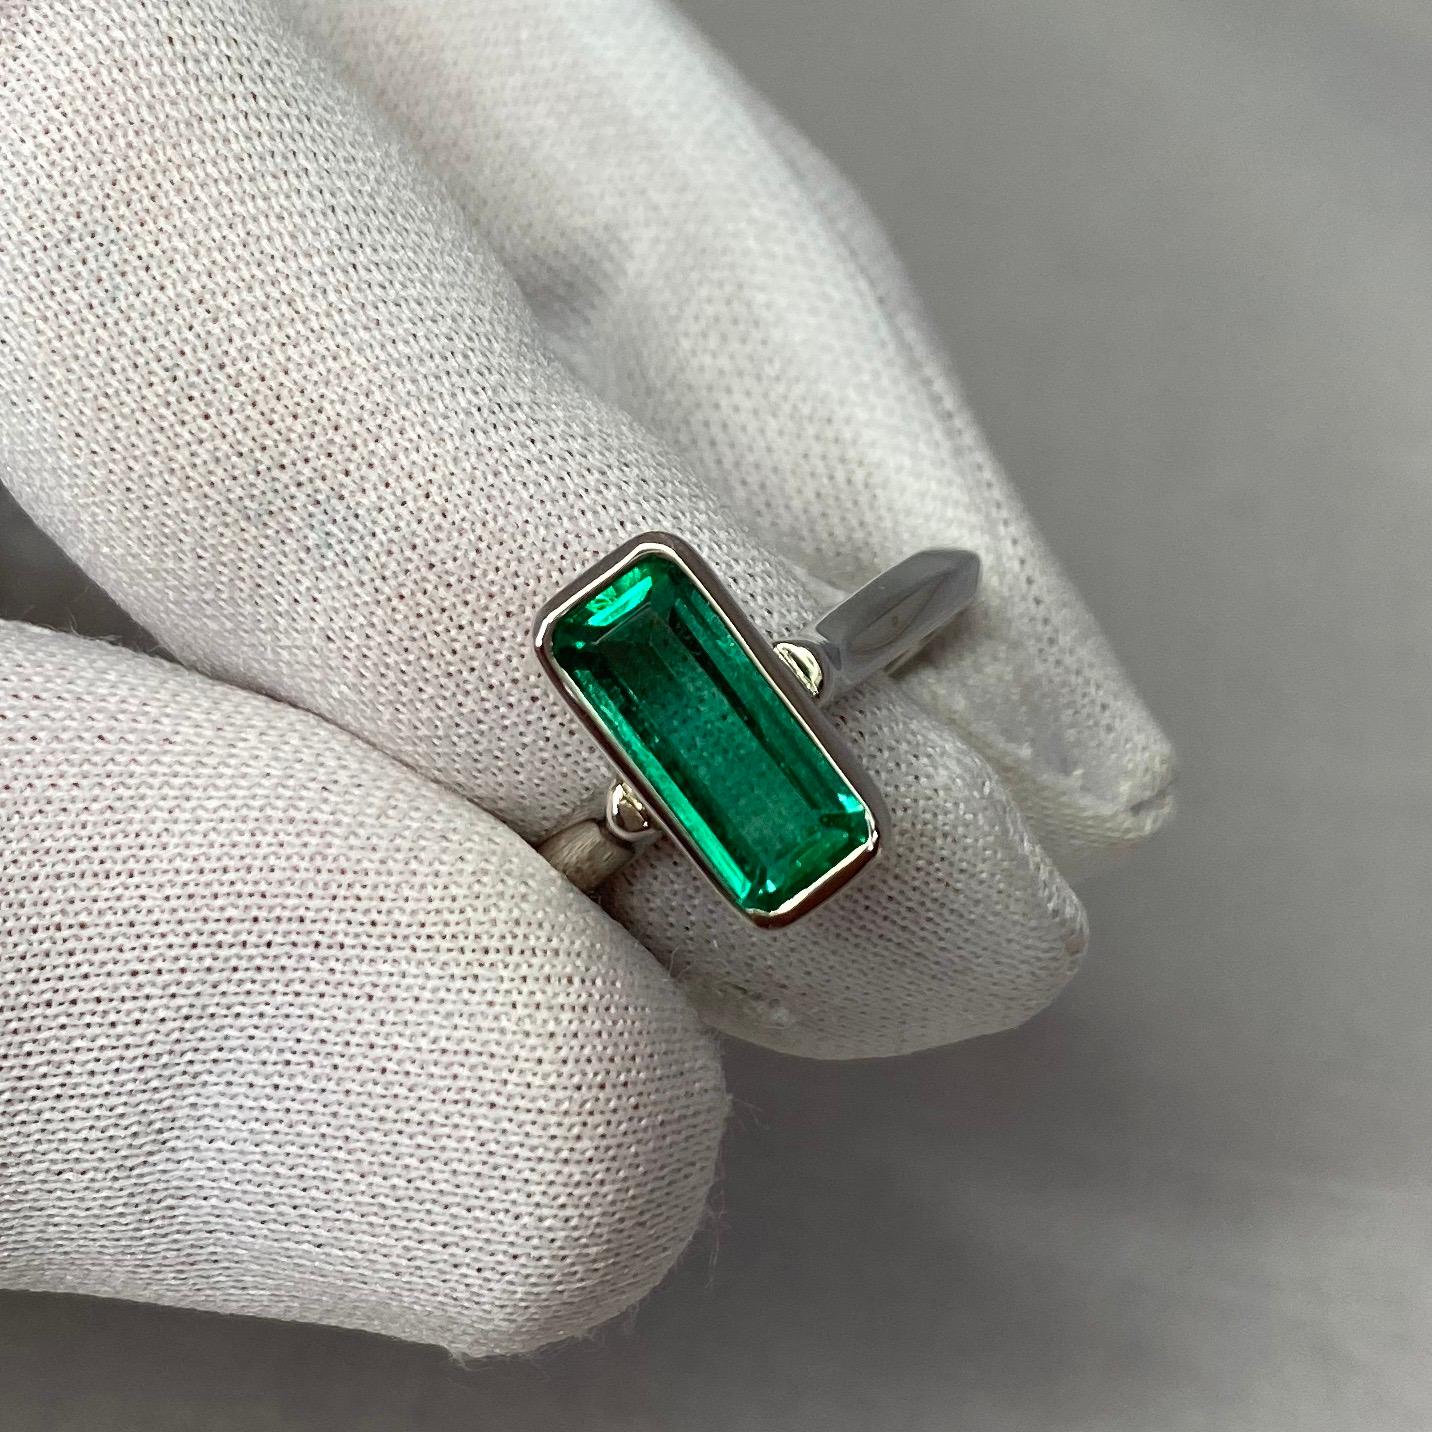 Emerald Cut Certified 1.76 Carat Colombian Emerald 18 Karat White Gold Solitaire Ring